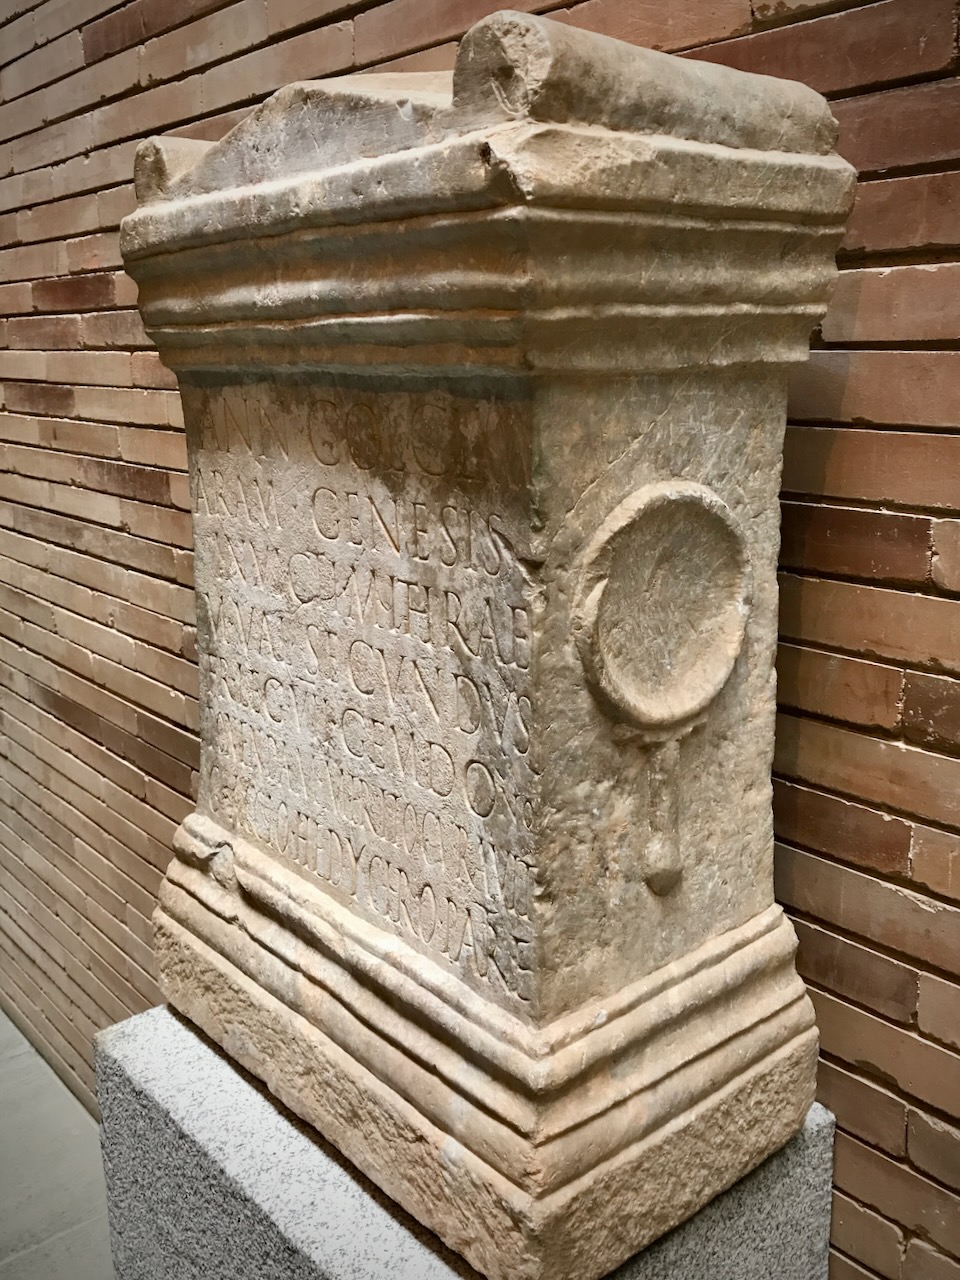 Right side of the altar by Marcus Valerius Secundus of Merida